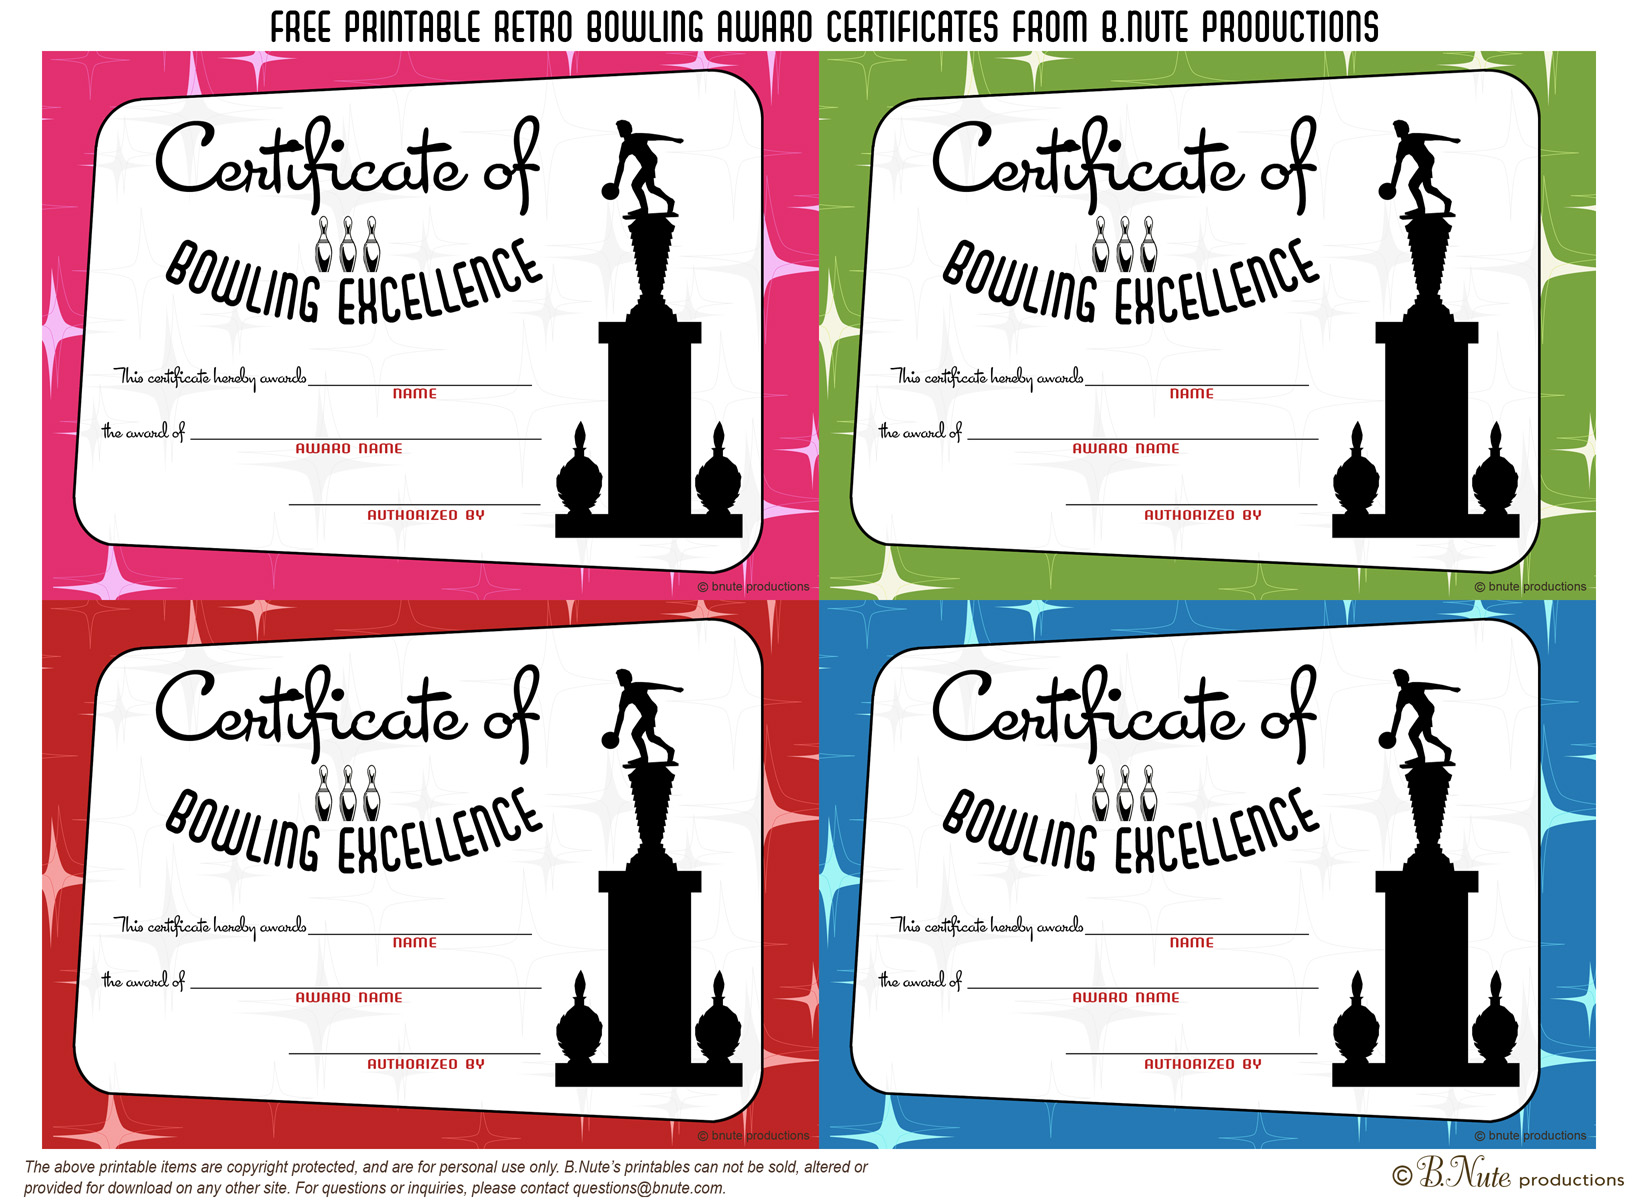 bnute productions Free Printable Bowling Award Certificates